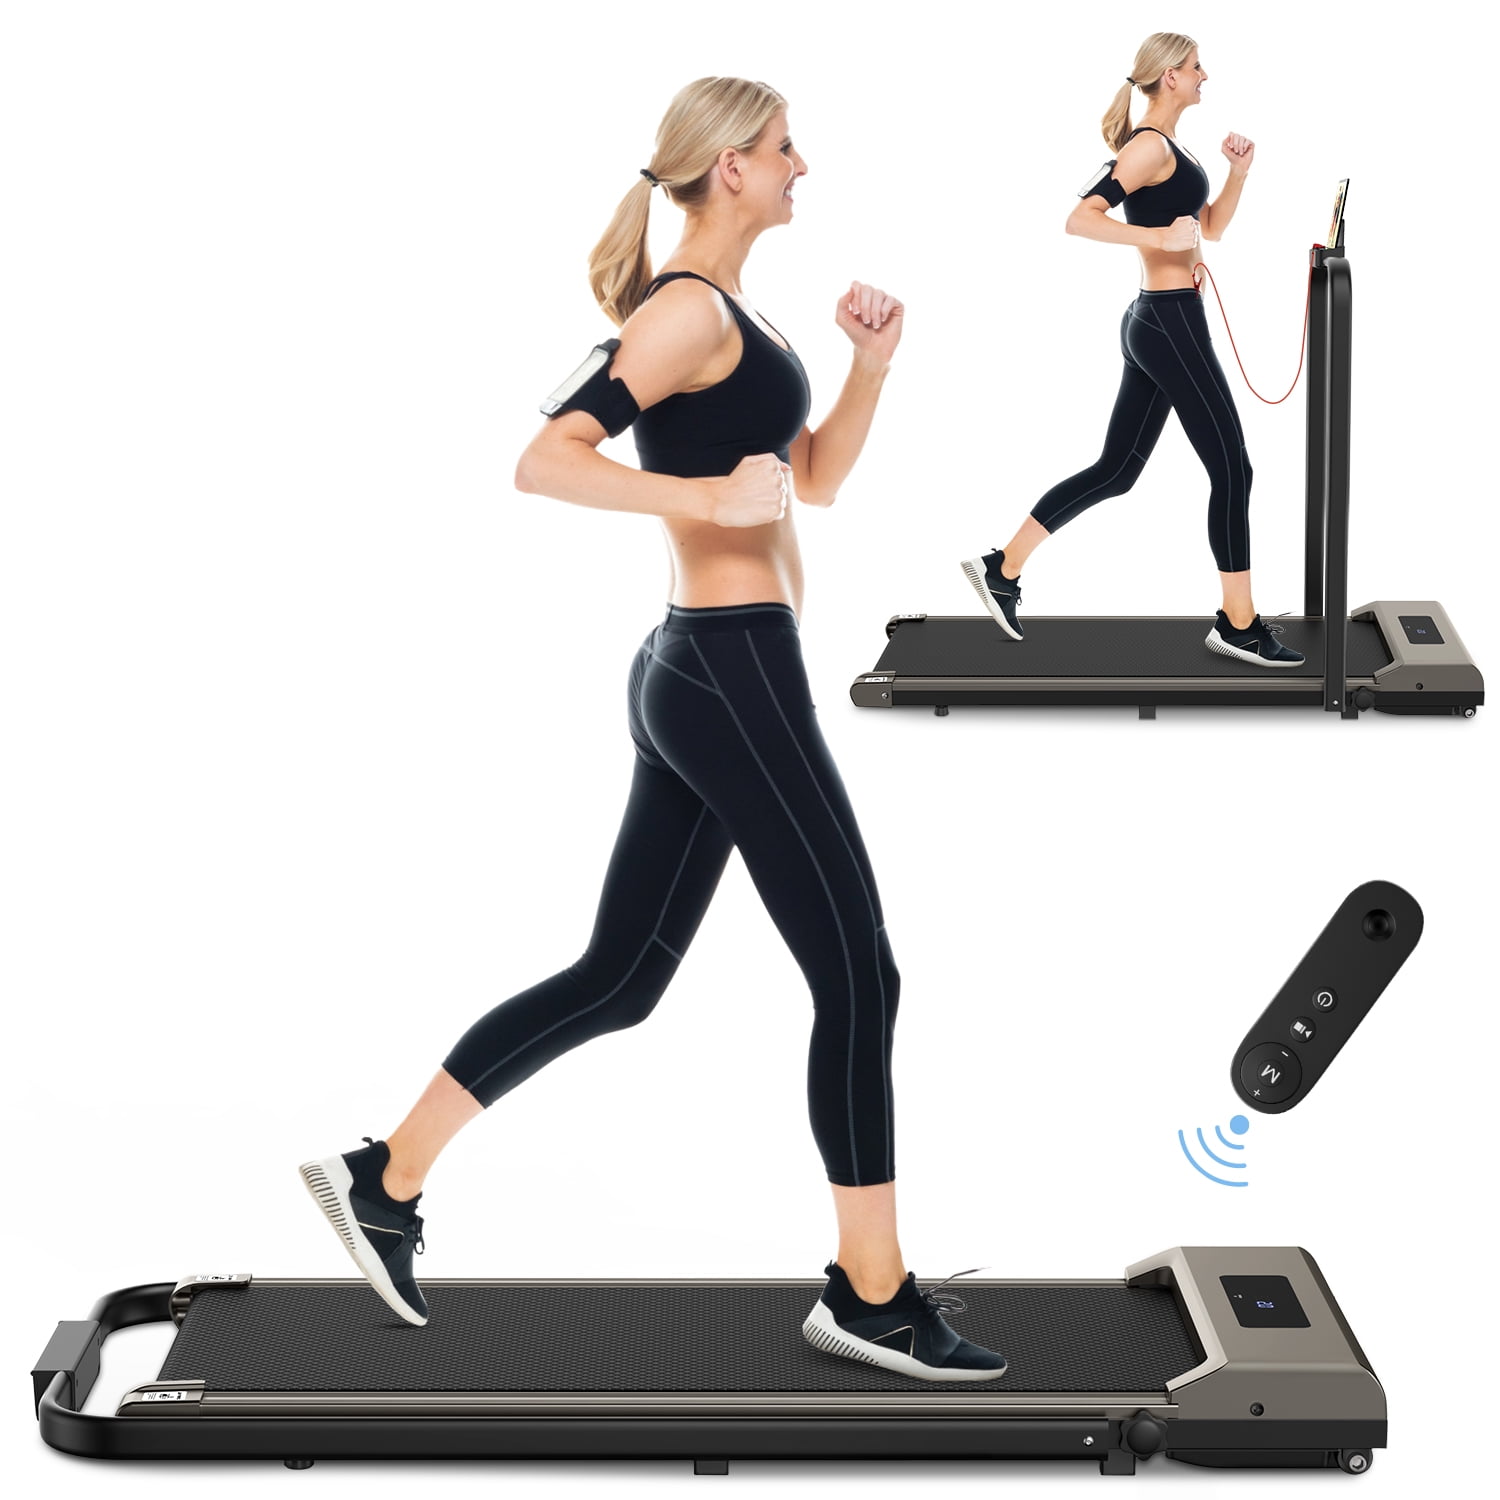 Bigzzia 1.5 HP Electric Treadmill Walking Machine with LCD Display, Under  Desk Compact Fold Treadmill 2 in 1 Walk Treadmill Pad for Home, Office 